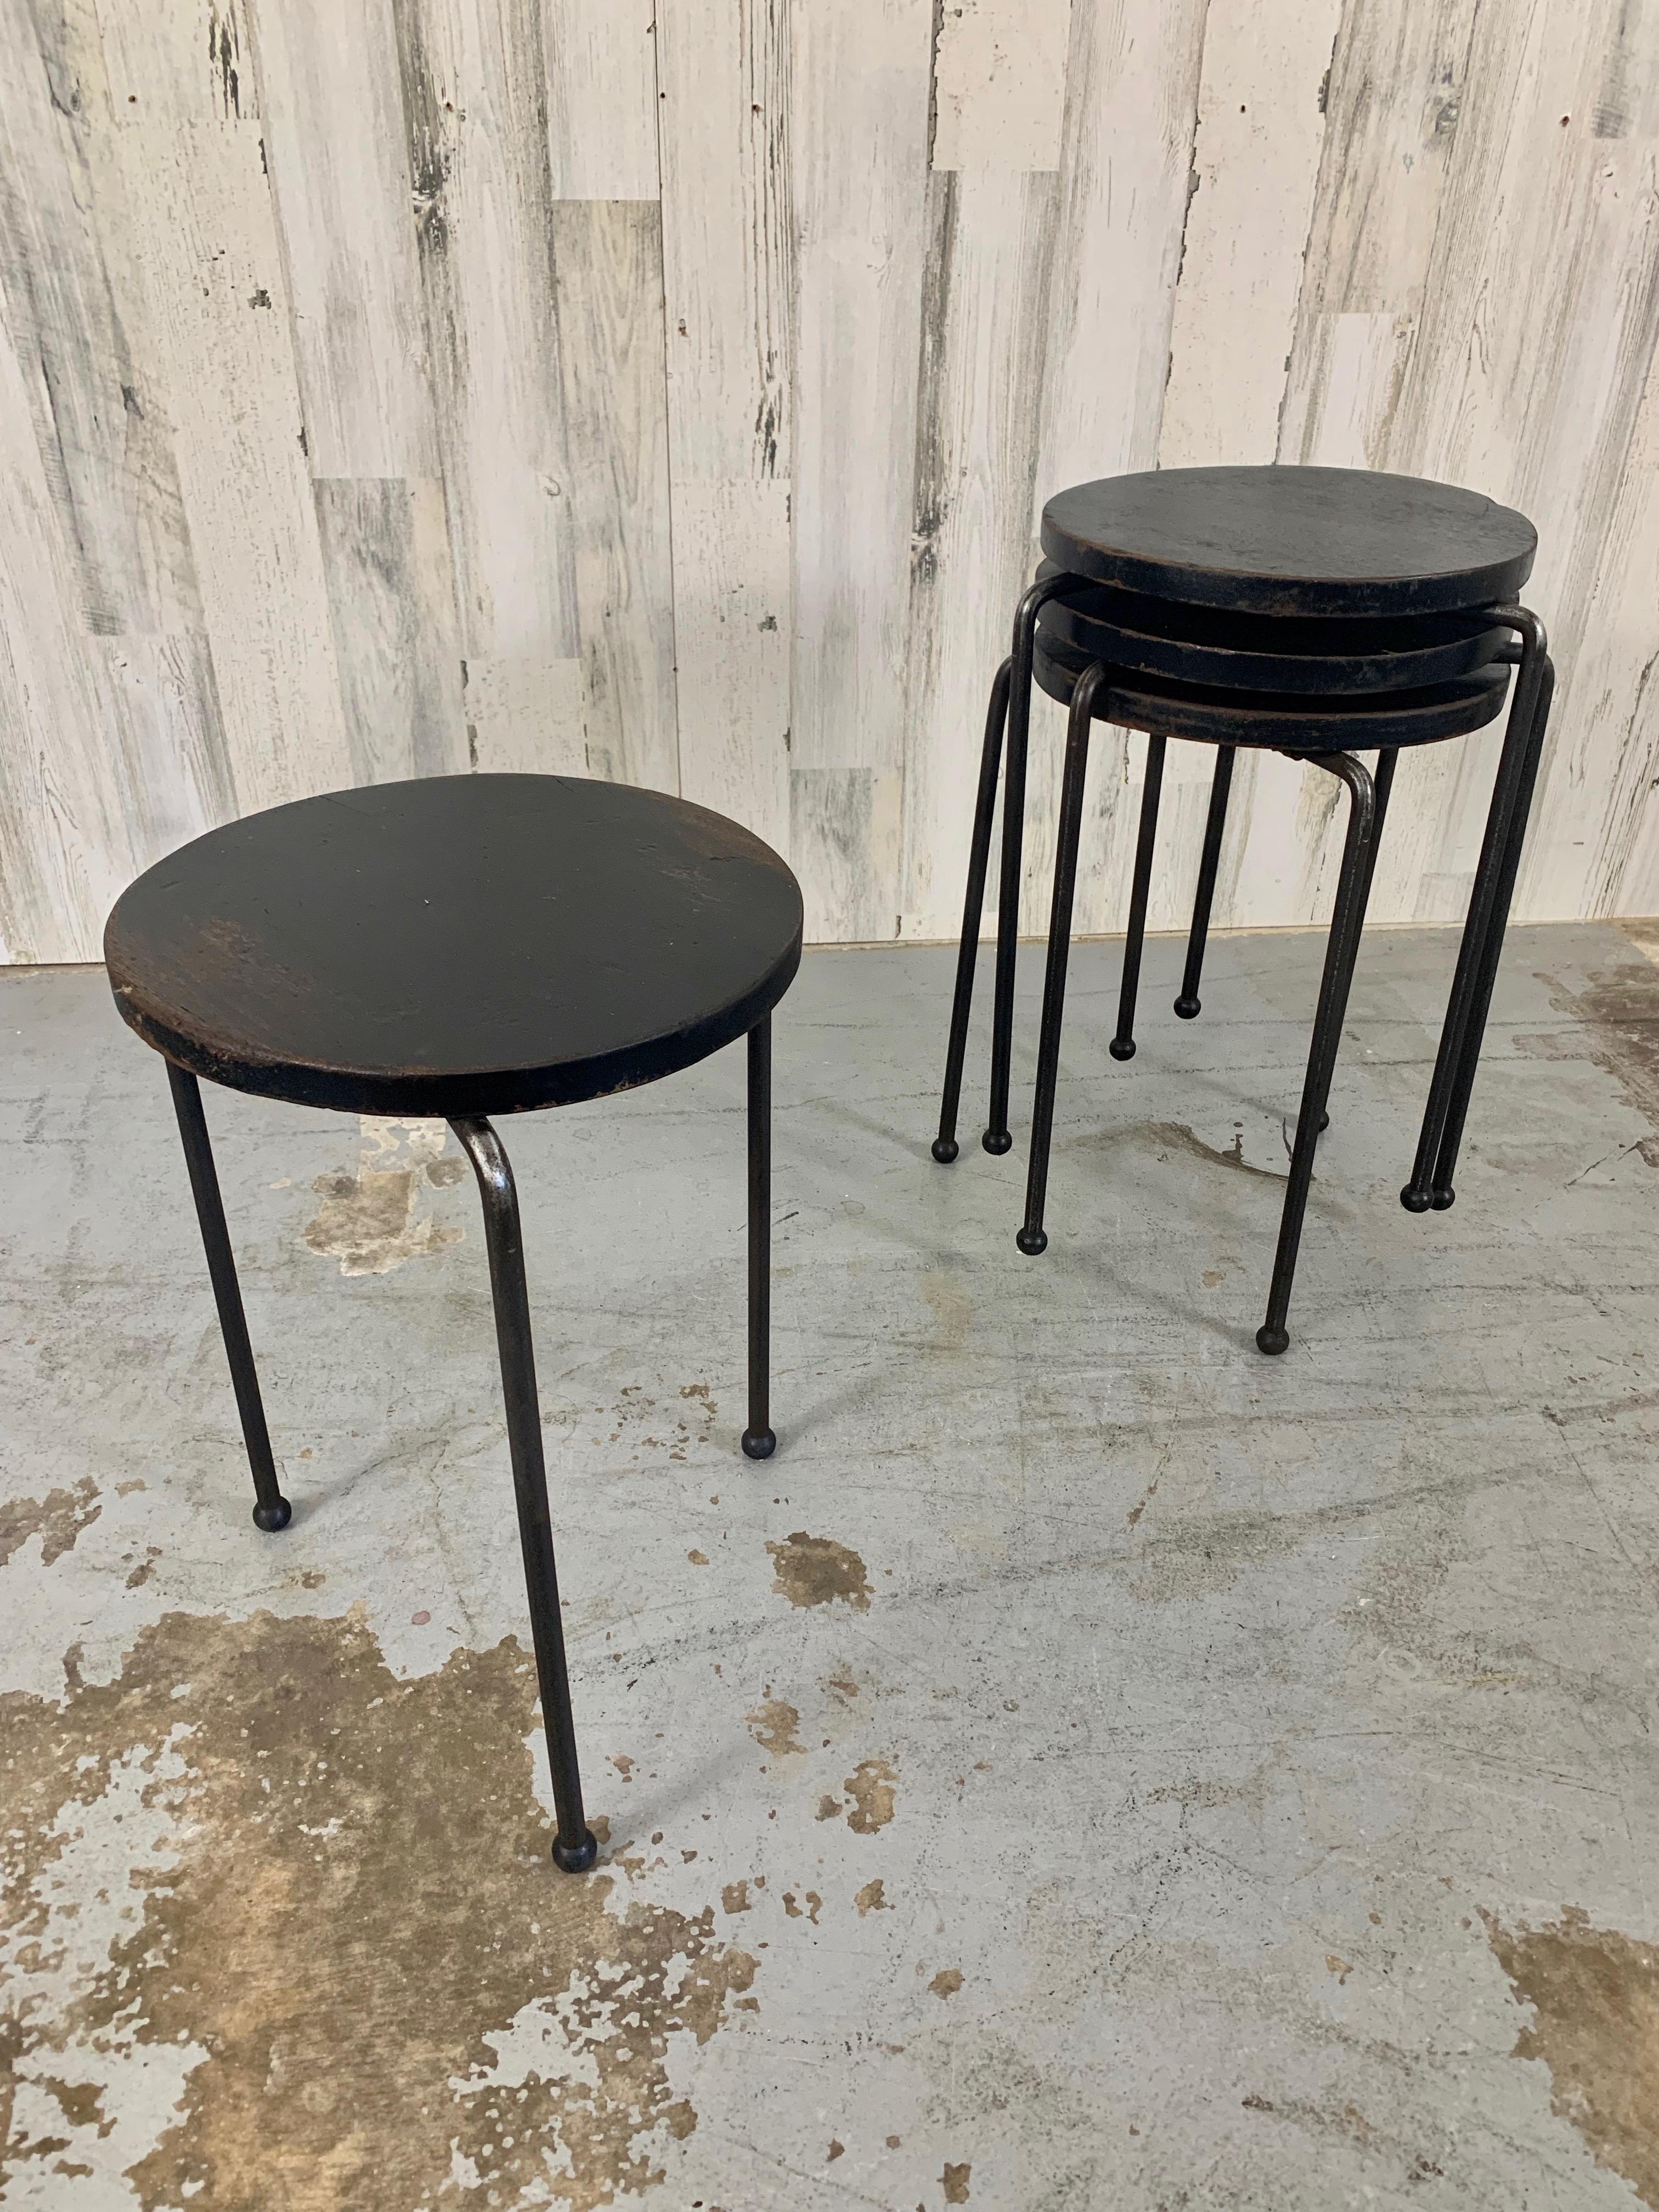 Set of four iron tripod legged stools / tables with ebonized wood tops. There is a nice patina of rust on the legs and wear on the wood tops that adds to the ambiance of age. Please see pictures.